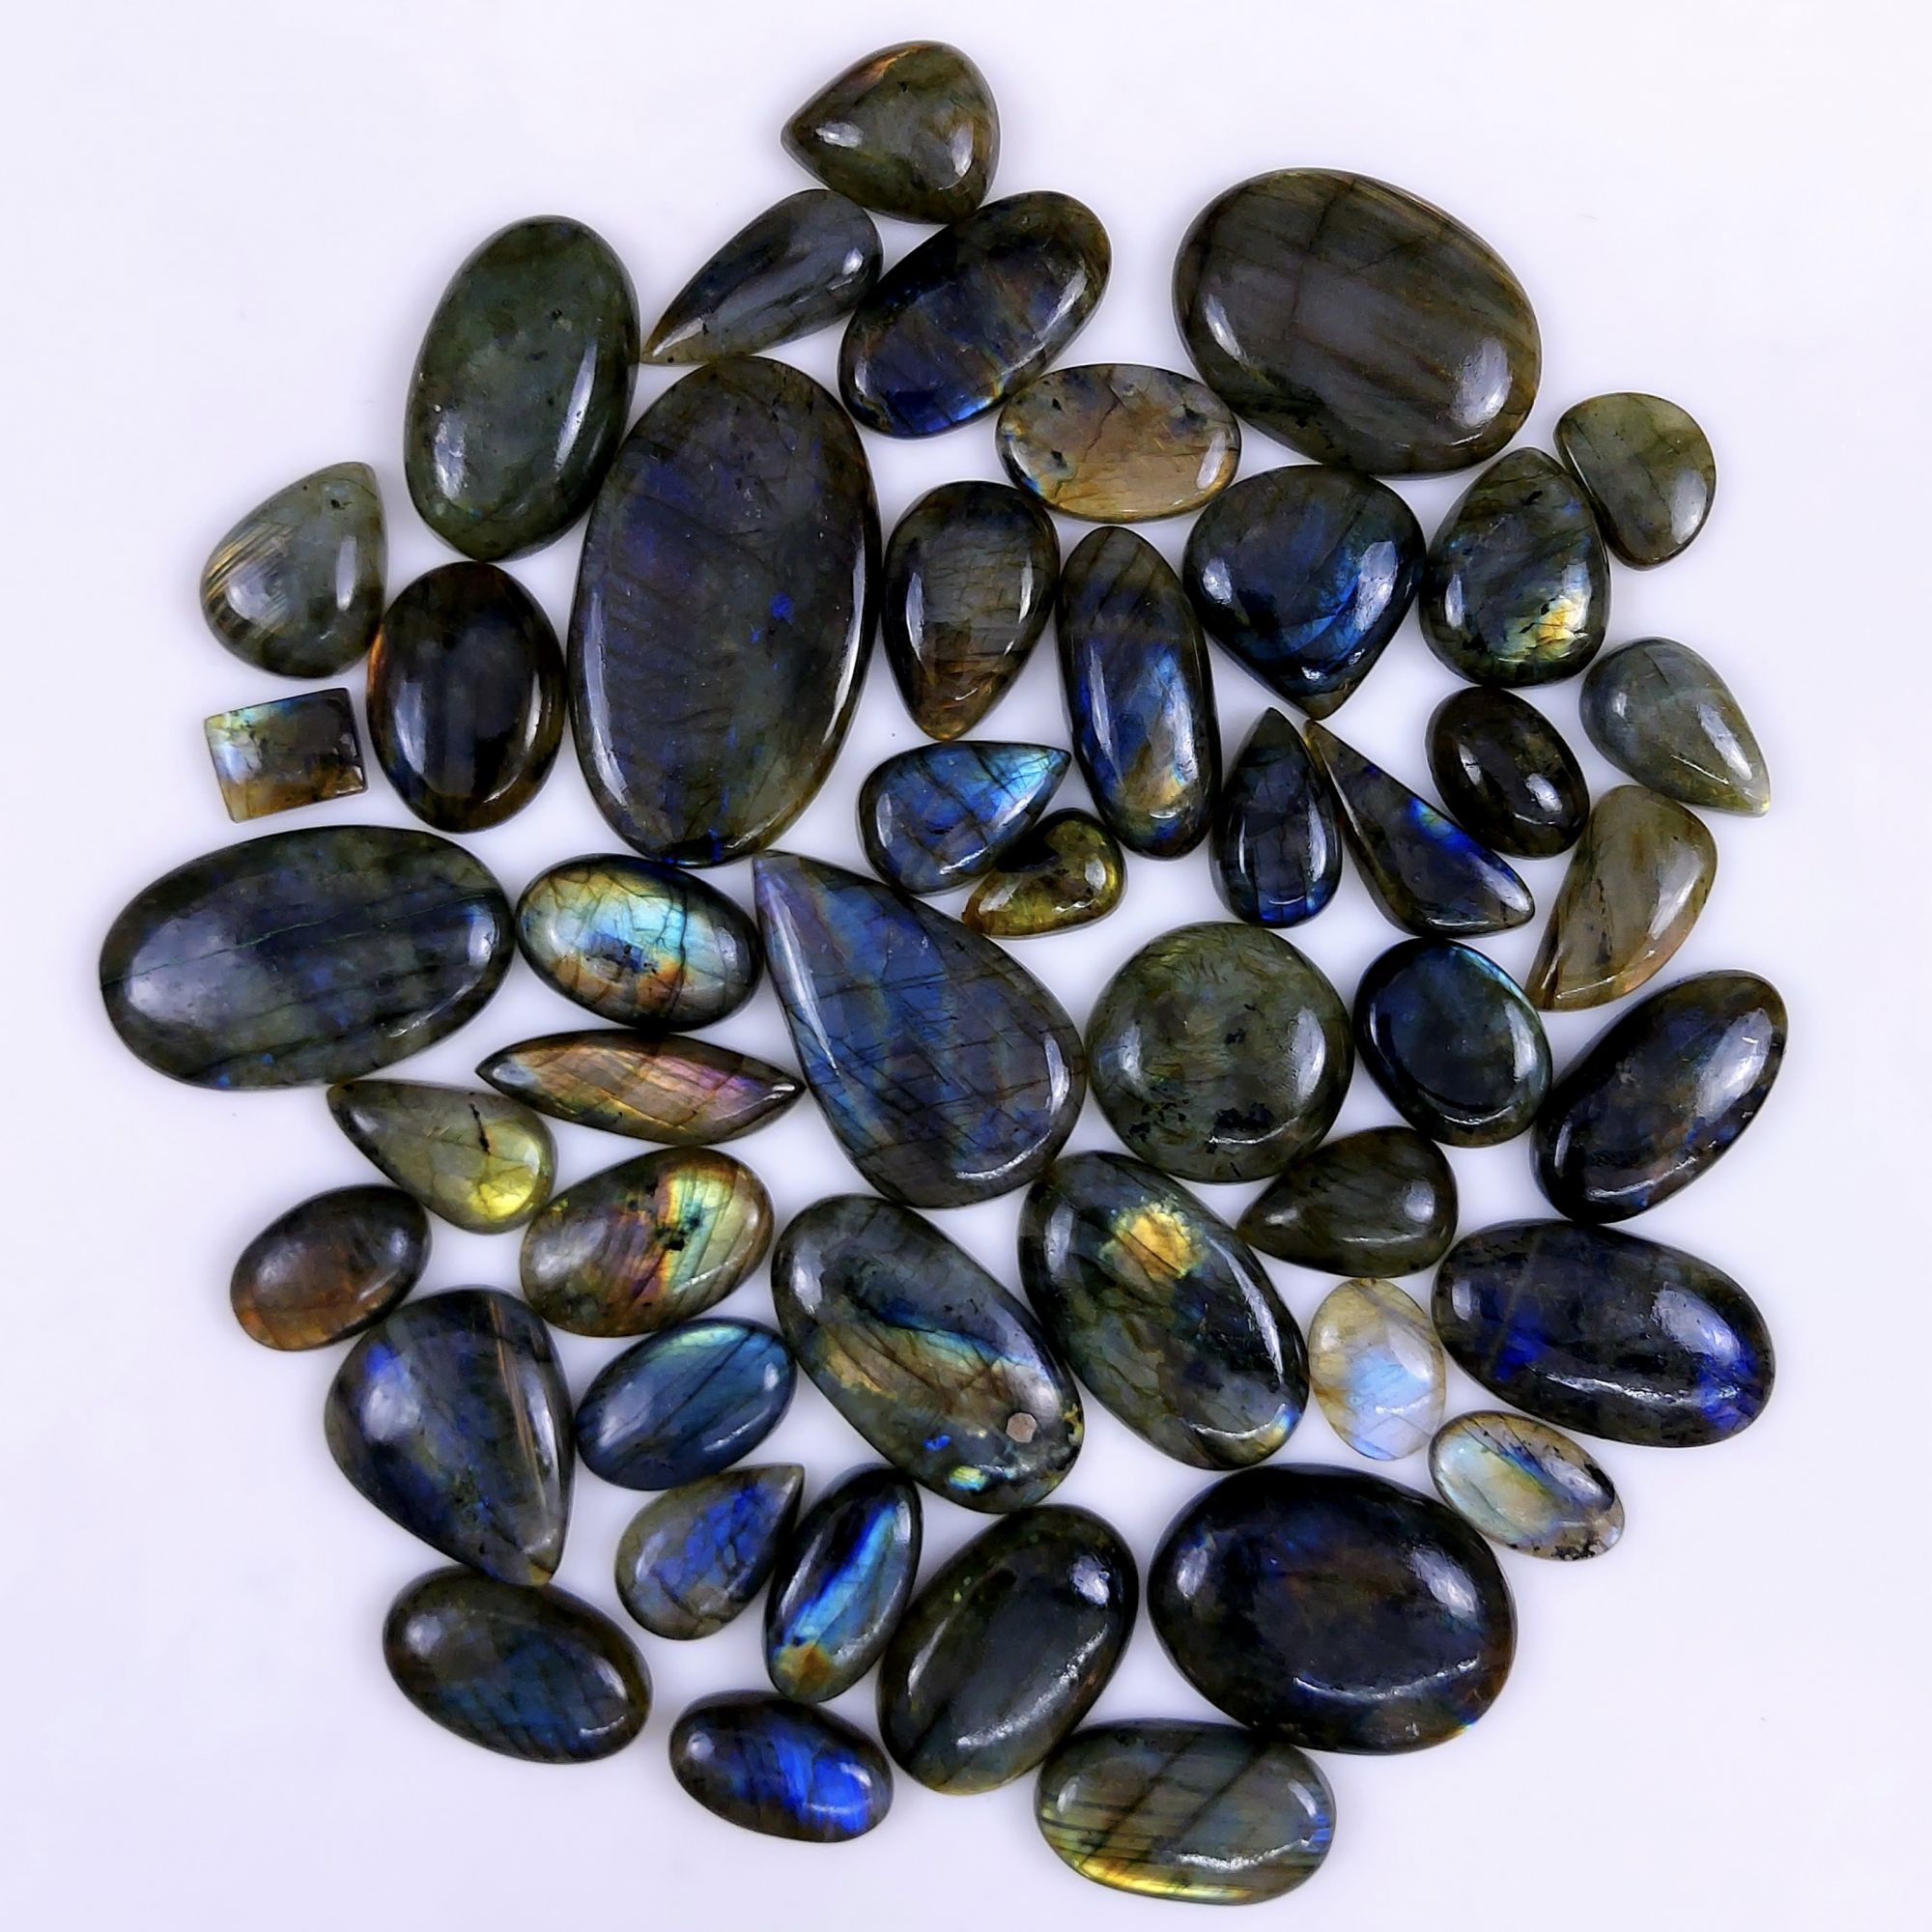 47pc 1761Cts Labradorite Cabochon Multifire Healing Crystal For Jewelry Supplies, Labradorite Necklace Handmade Wire Wrapped Gemstone Pendant 57x35 16x12mm#6274